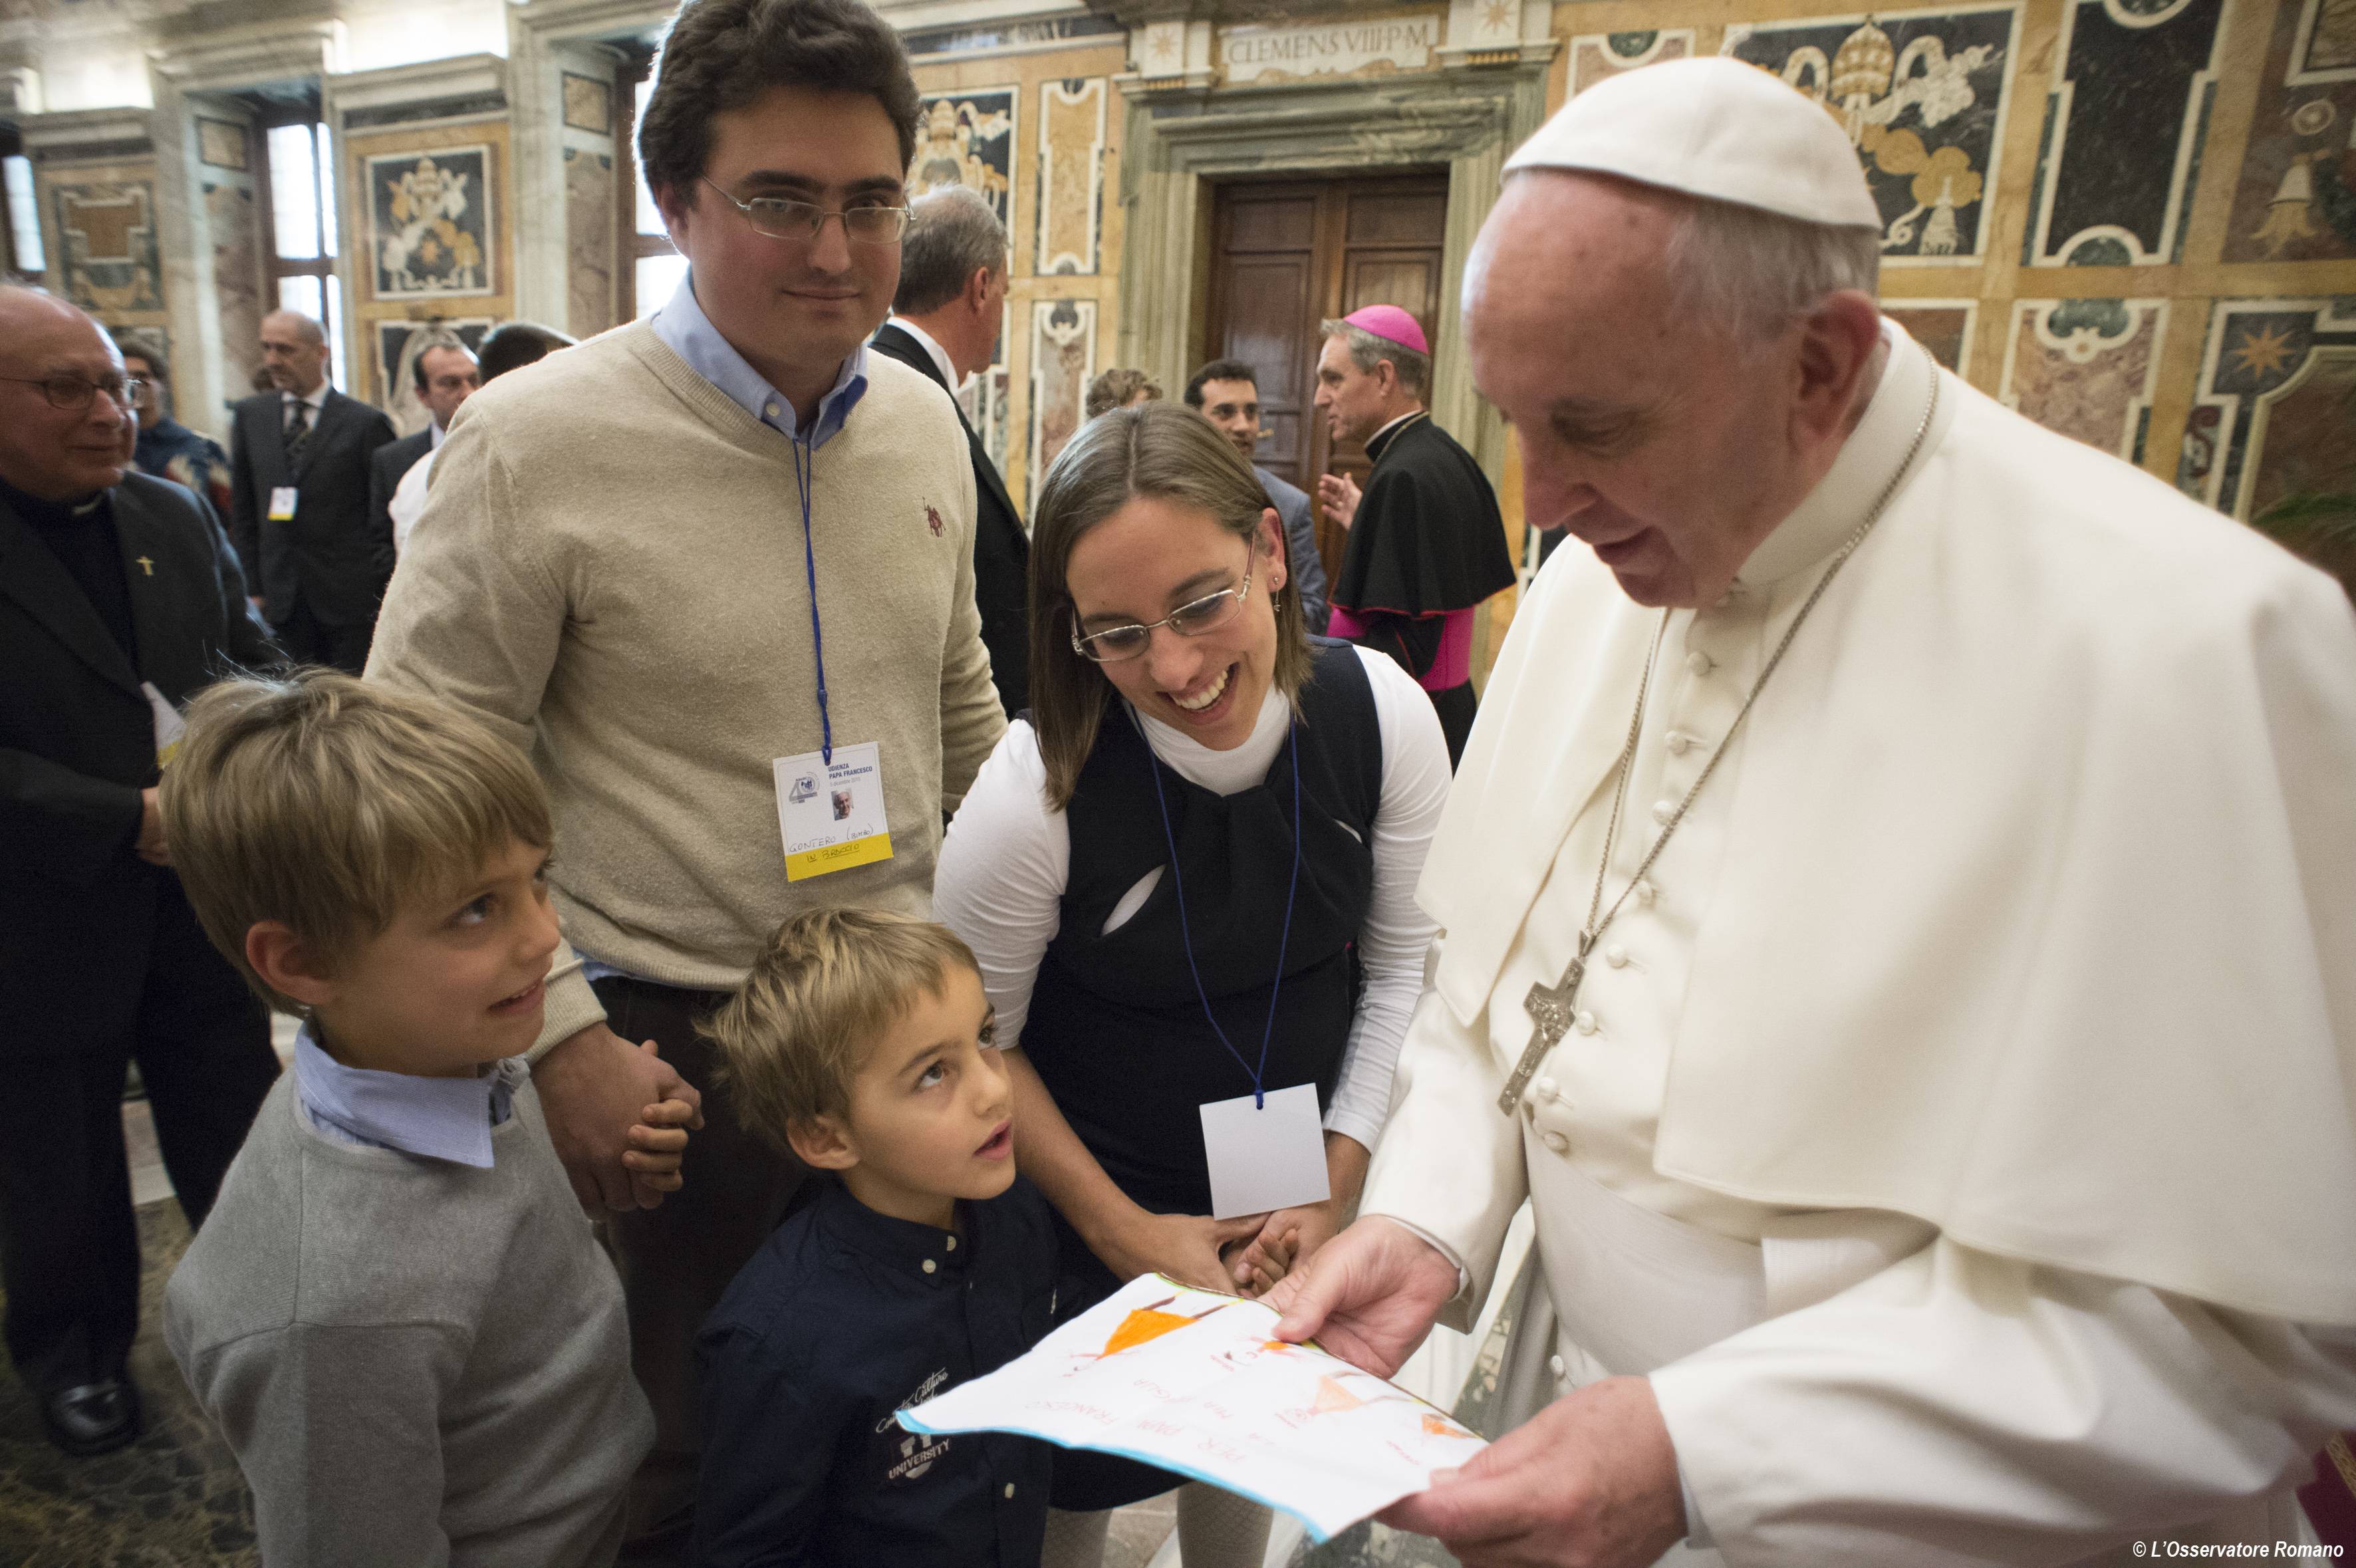 Papal audience to the Association of Catholic School Parents (Associazione Genitori Scuole Cattoliche-AGESC)